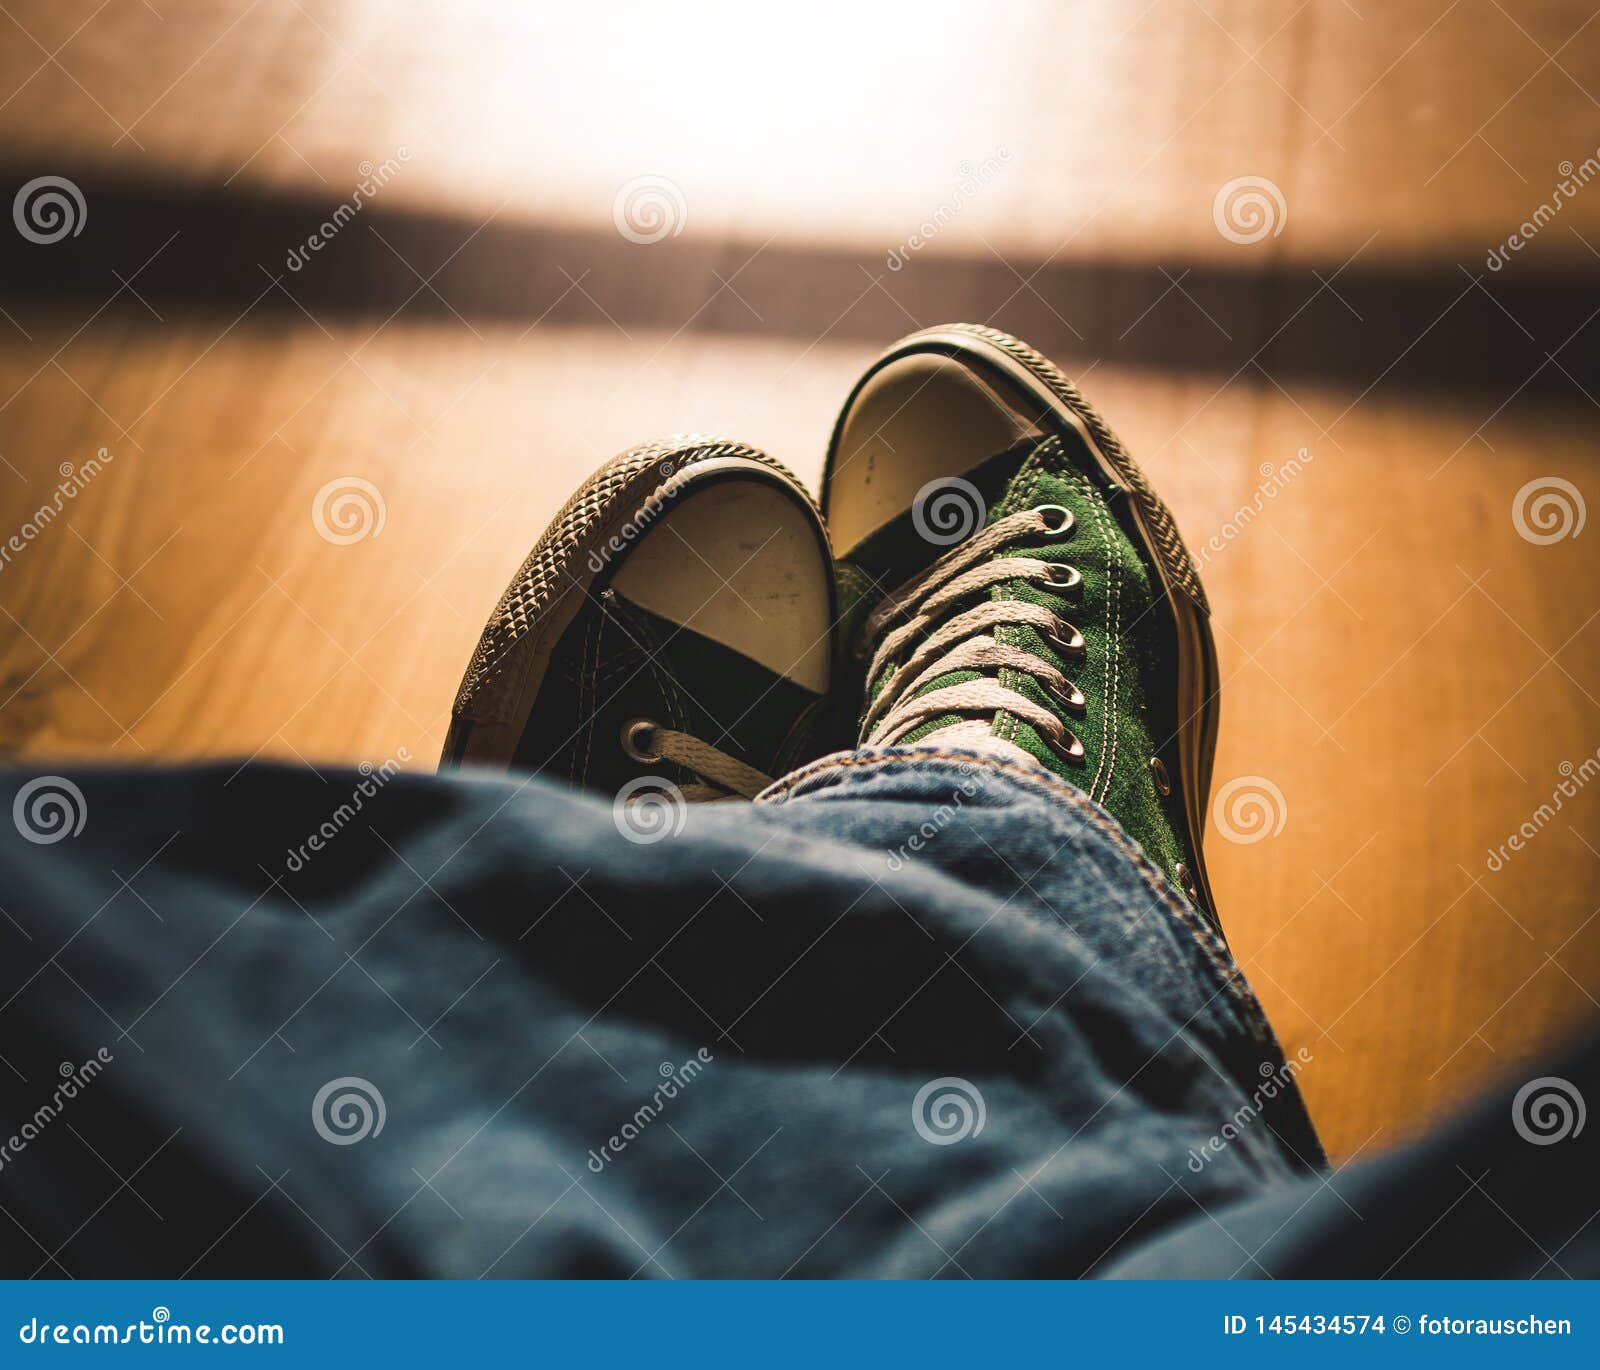 First-person View on Retro Sneakers - Legs Crossed Stock Photo - Image ...